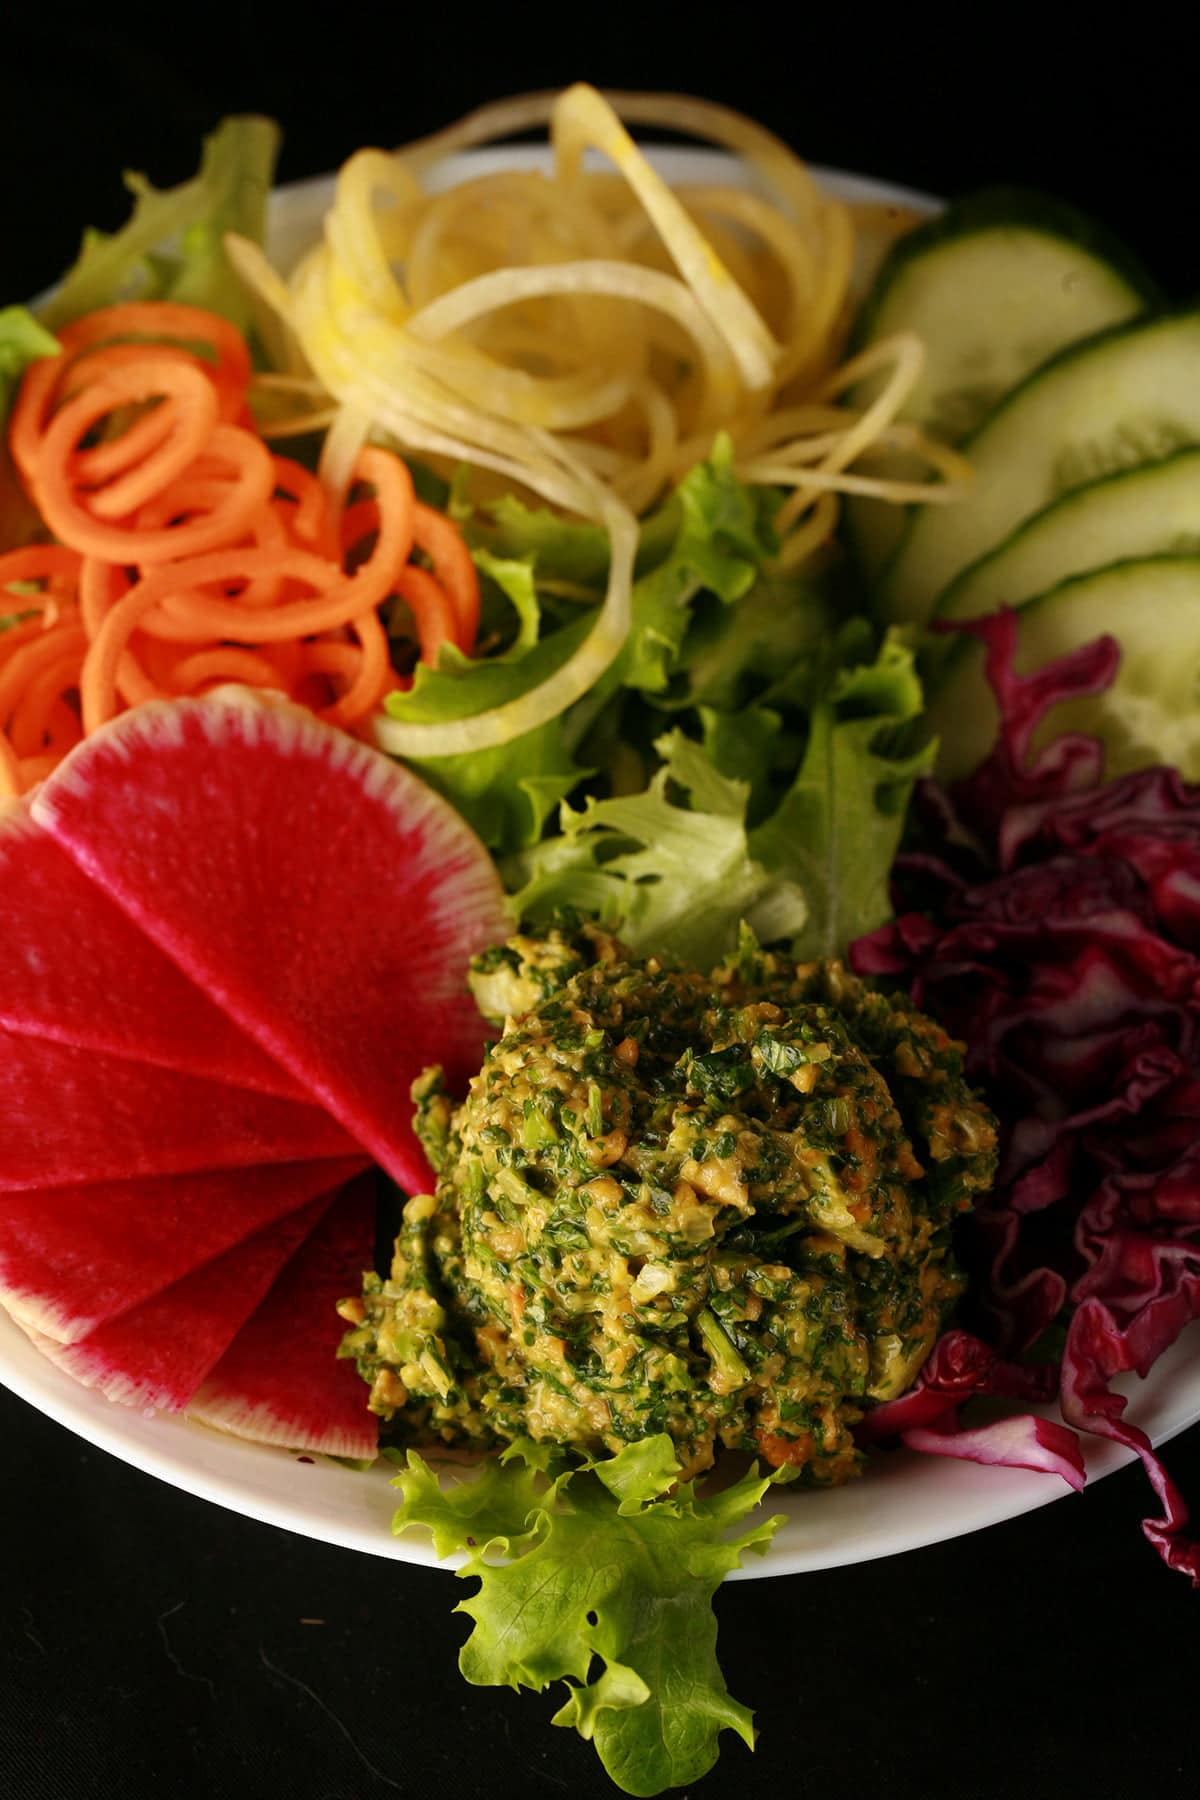 A large scoop of cilantro pesto is shown against the backdrop of a gloriously colourful salad - greens, watermelon radish, spiralized carrots and yellow beets, cucumber, and purple cabbage!